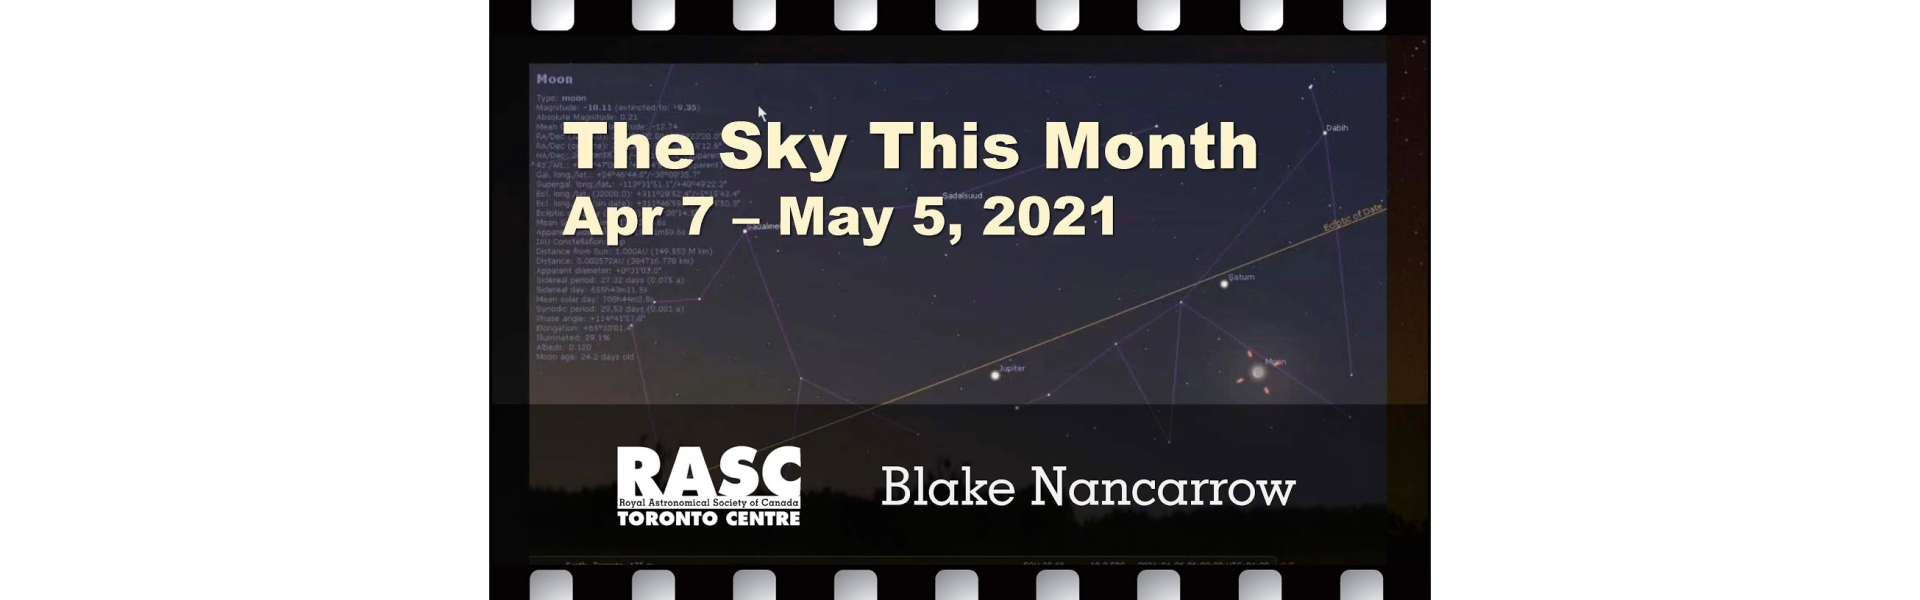 The Sky This Month, April 7 - May 5, 2021